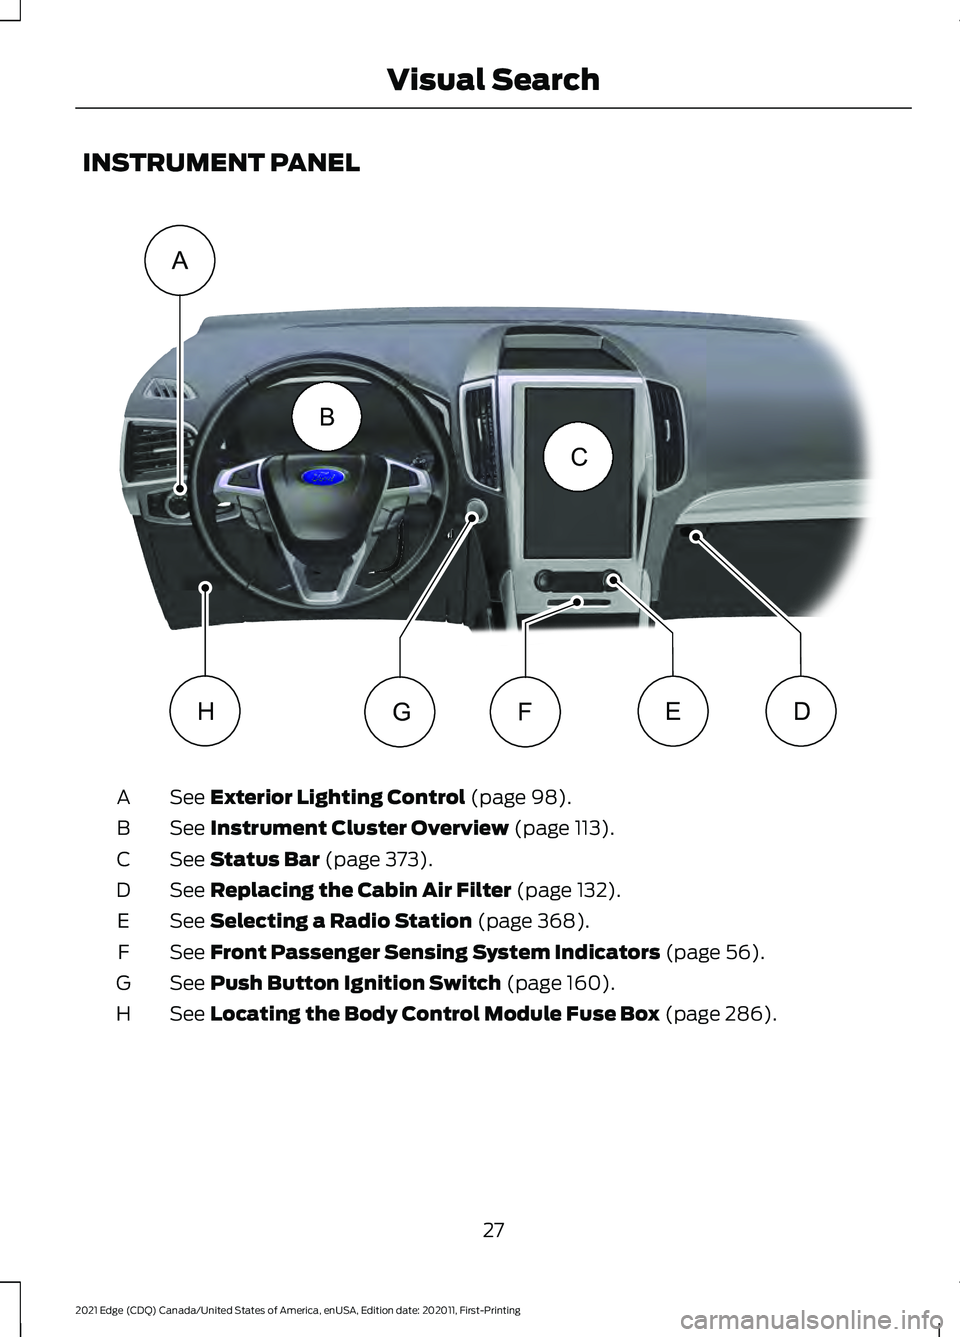 FORD EDGE 2021  Owners Manual INSTRUMENT PANEL
See Exterior Lighting Control (page 98).
A
See 
Instrument Cluster Overview (page 113).
B
See 
Status Bar (page 373).
C
See 
Replacing the Cabin Air Filter (page 132).
D
See 
Selectin